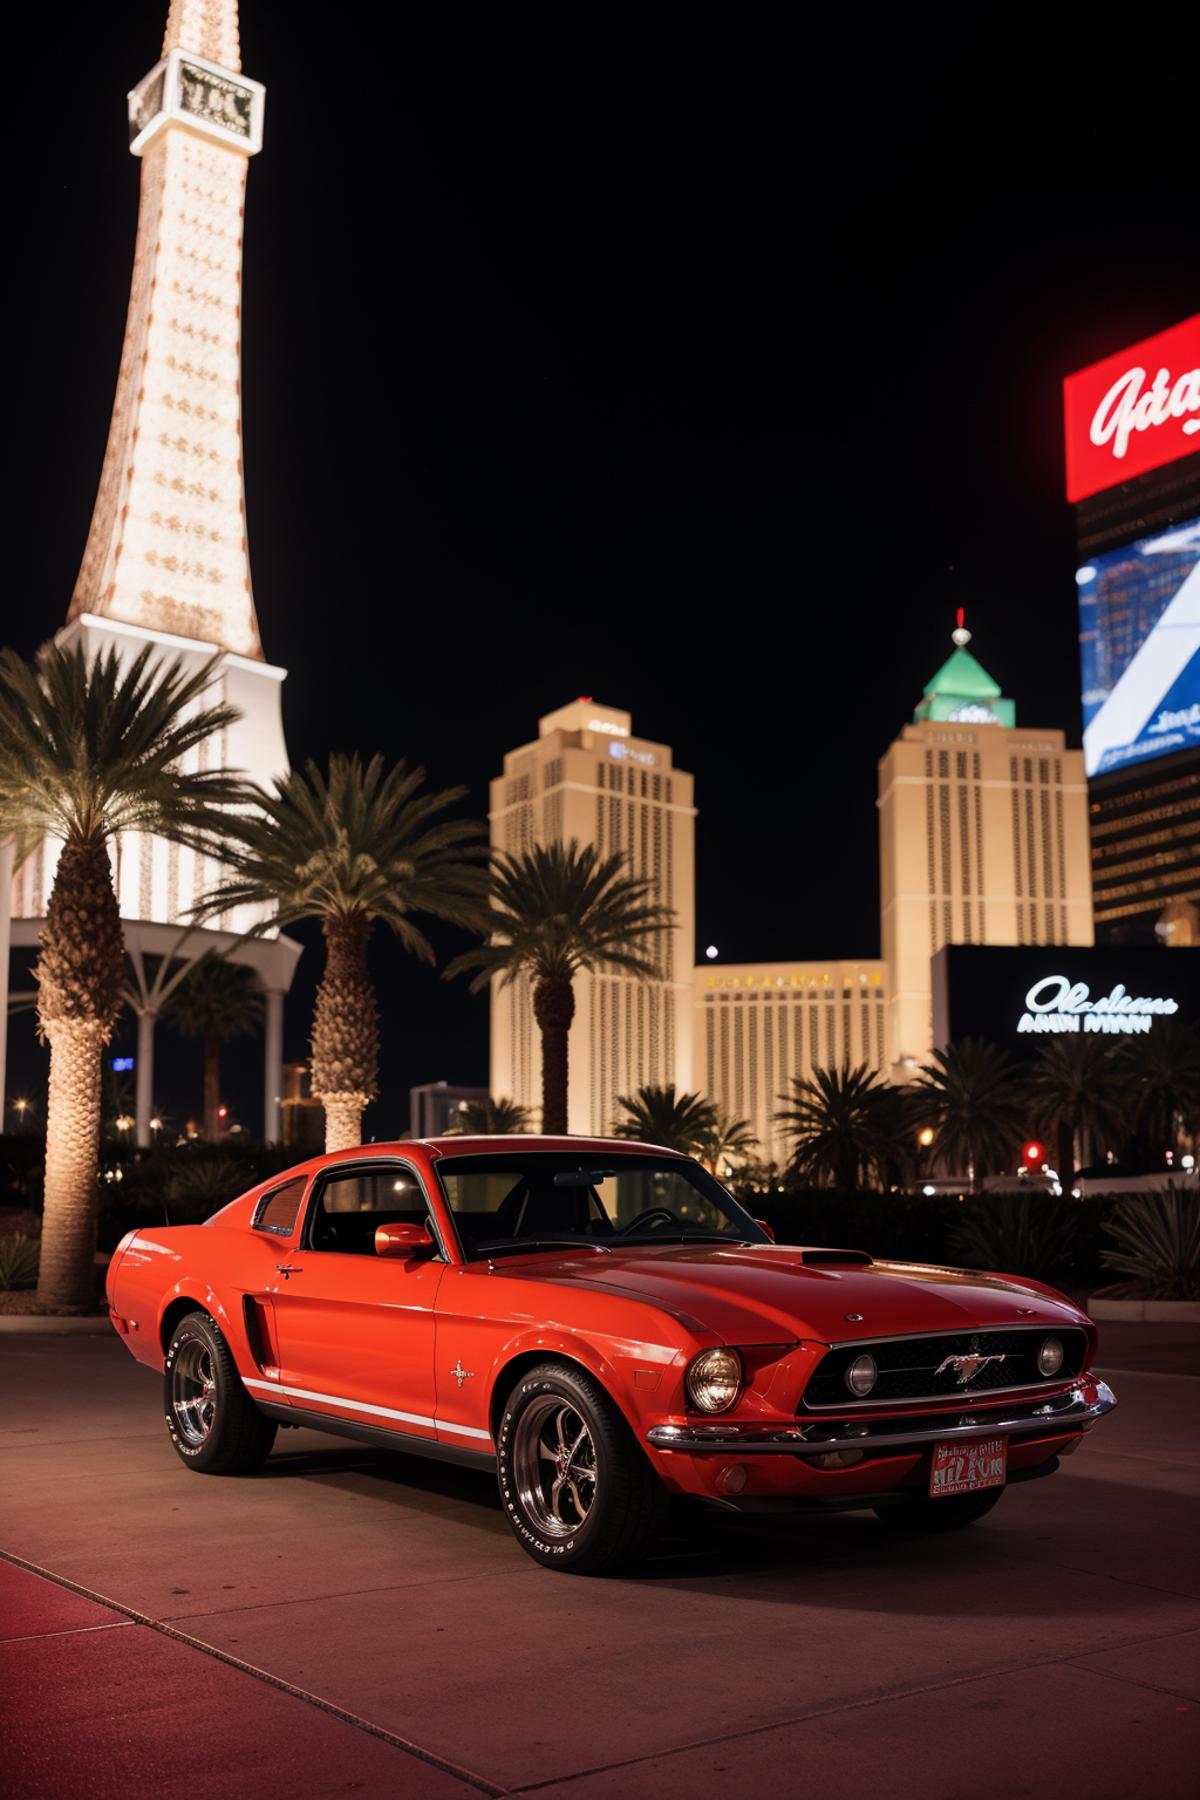 A vintage red Mustang is parked in front of a luxury hotel in Las Vegas.